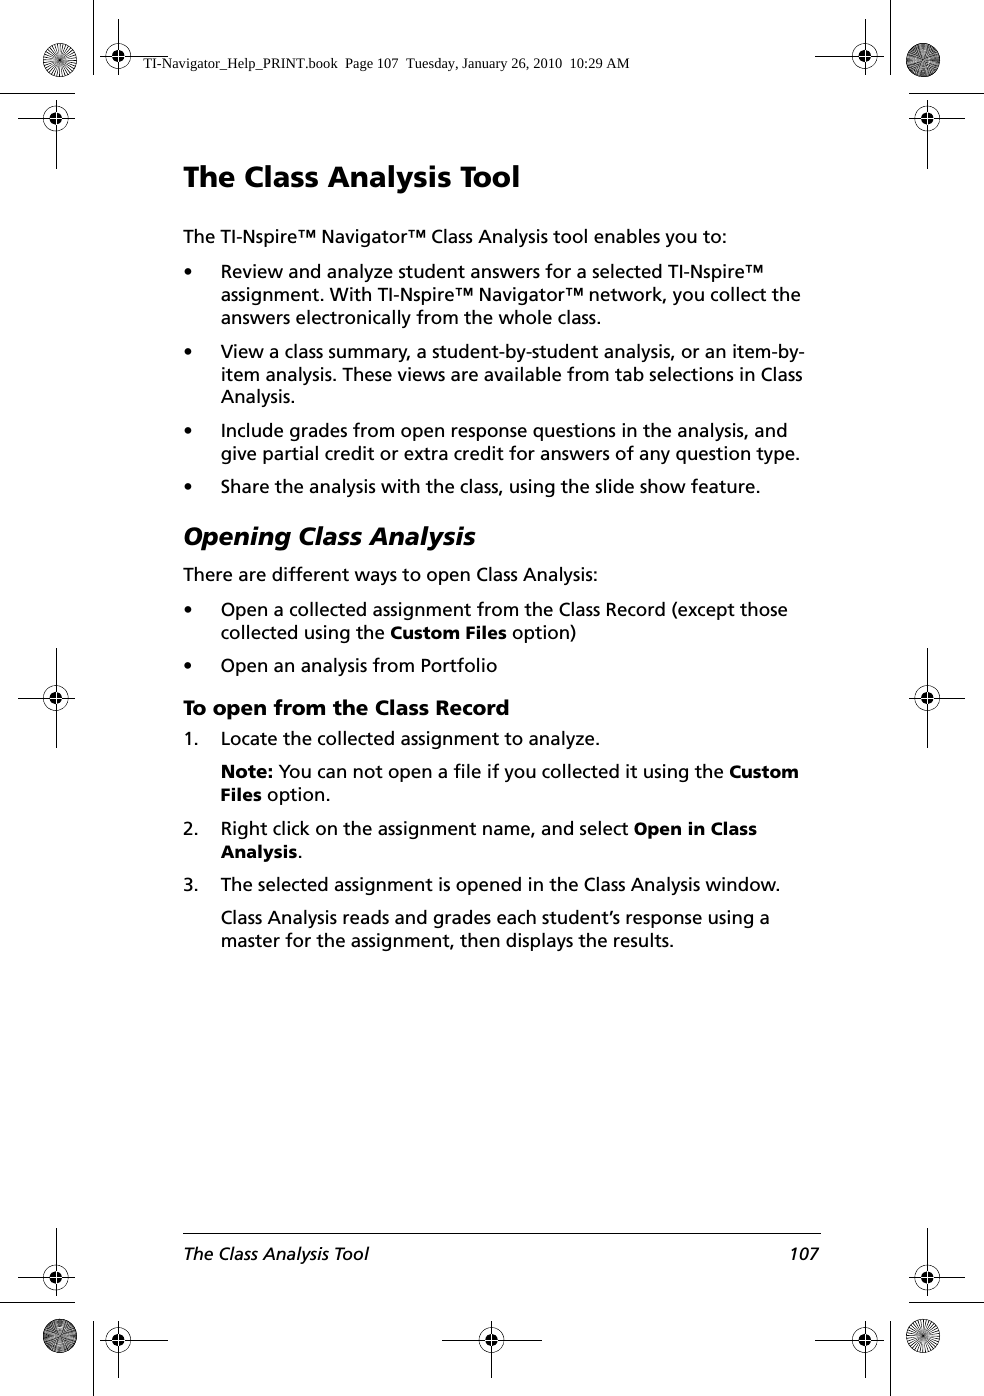 The Class Analysis Tool 107The Class Analysis ToolThe TI-Nspire™ Navigator™ Class Analysis tool enables you to:• Review and analyze student answers for a selected TI-Nspire™ assignment. With TI-Nspire™ Navigator™ network, you collect the answers electronically from the whole class.• View a class summary, a student-by-student analysis, or an item-by-item analysis. These views are available from tab selections in Class Analysis.• Include grades from open response questions in the analysis, and give partial credit or extra credit for answers of any question type.• Share the analysis with the class, using the slide show feature.Opening Class AnalysisThere are different ways to open Class Analysis:• Open a collected assignment from the Class Record (except those collected using the Custom Files option)• Open an analysis from PortfolioTo open from the Class Record 1. Locate the collected assignment to analyze.Note: You can not open a file if you collected it using the Custom Files option.2. Right click on the assignment name, and select Open in Class Analysis.3. The selected assignment is opened in the Class Analysis window. Class Analysis reads and grades each student’s response using a master for the assignment, then displays the results. TI-Navigator_Help_PRINT.book  Page 107  Tuesday, January 26, 2010  10:29 AM